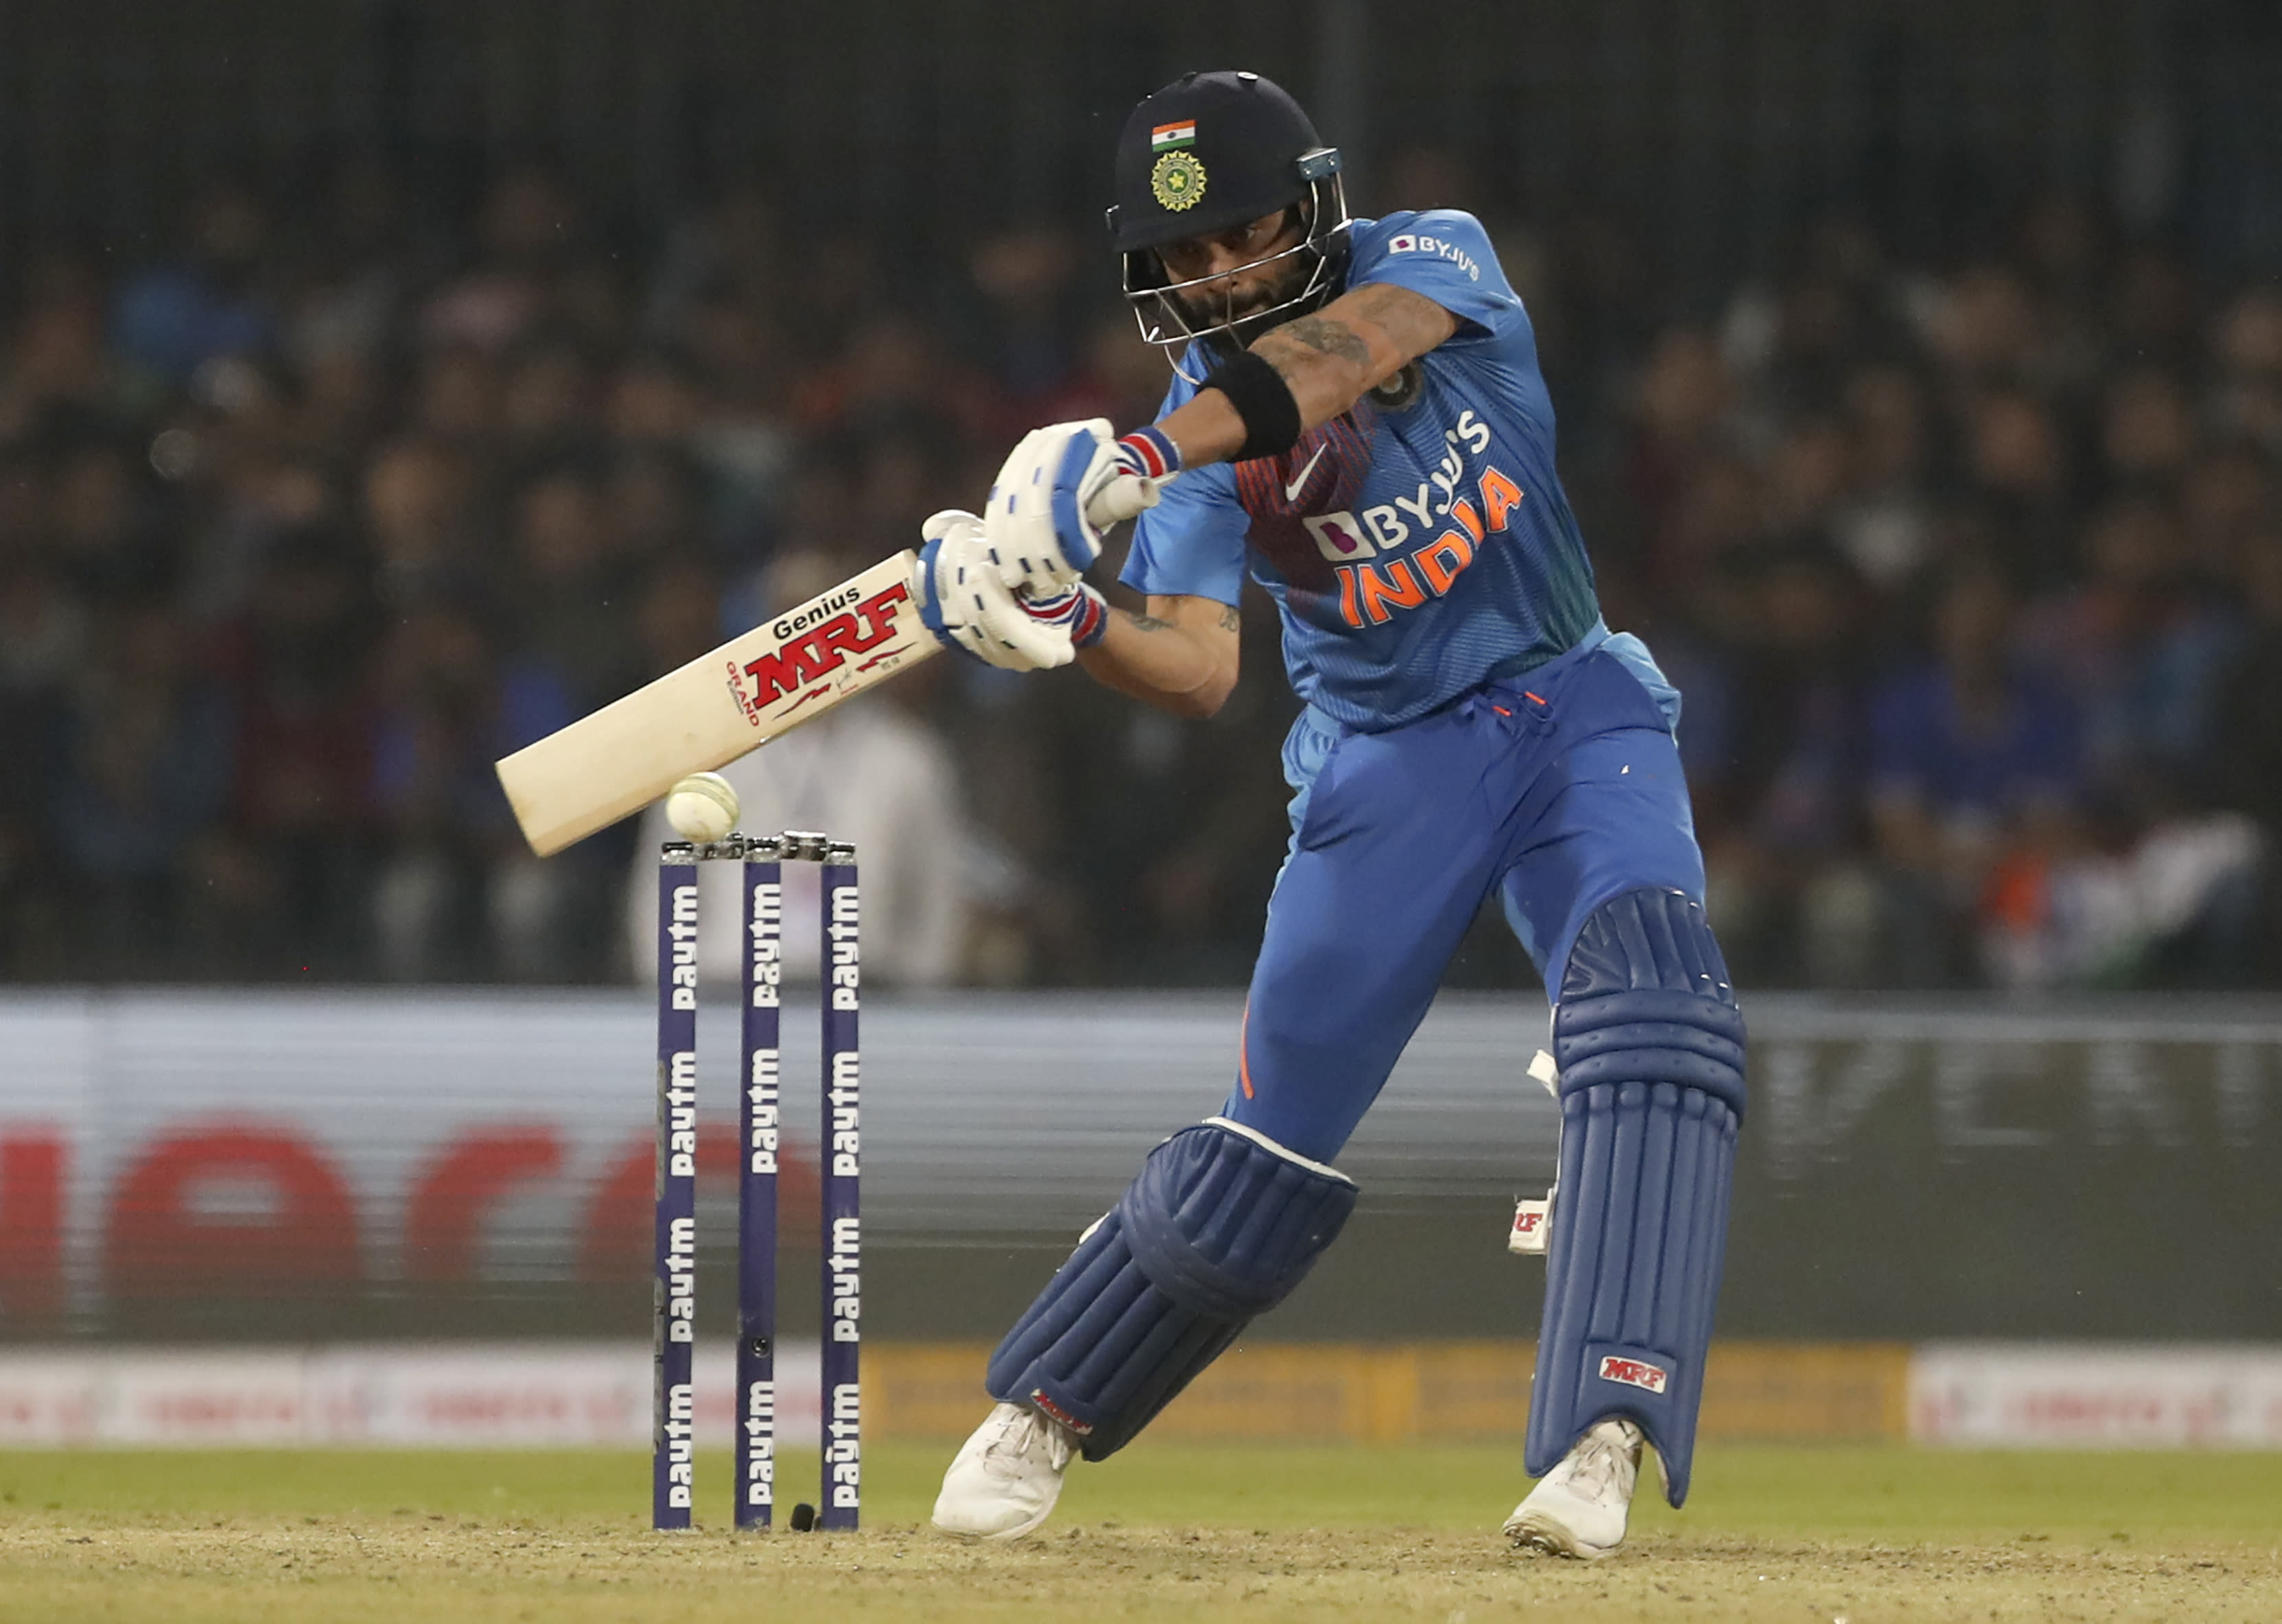 India wins 2nd T20 against Sri Lanka by 7 wickets